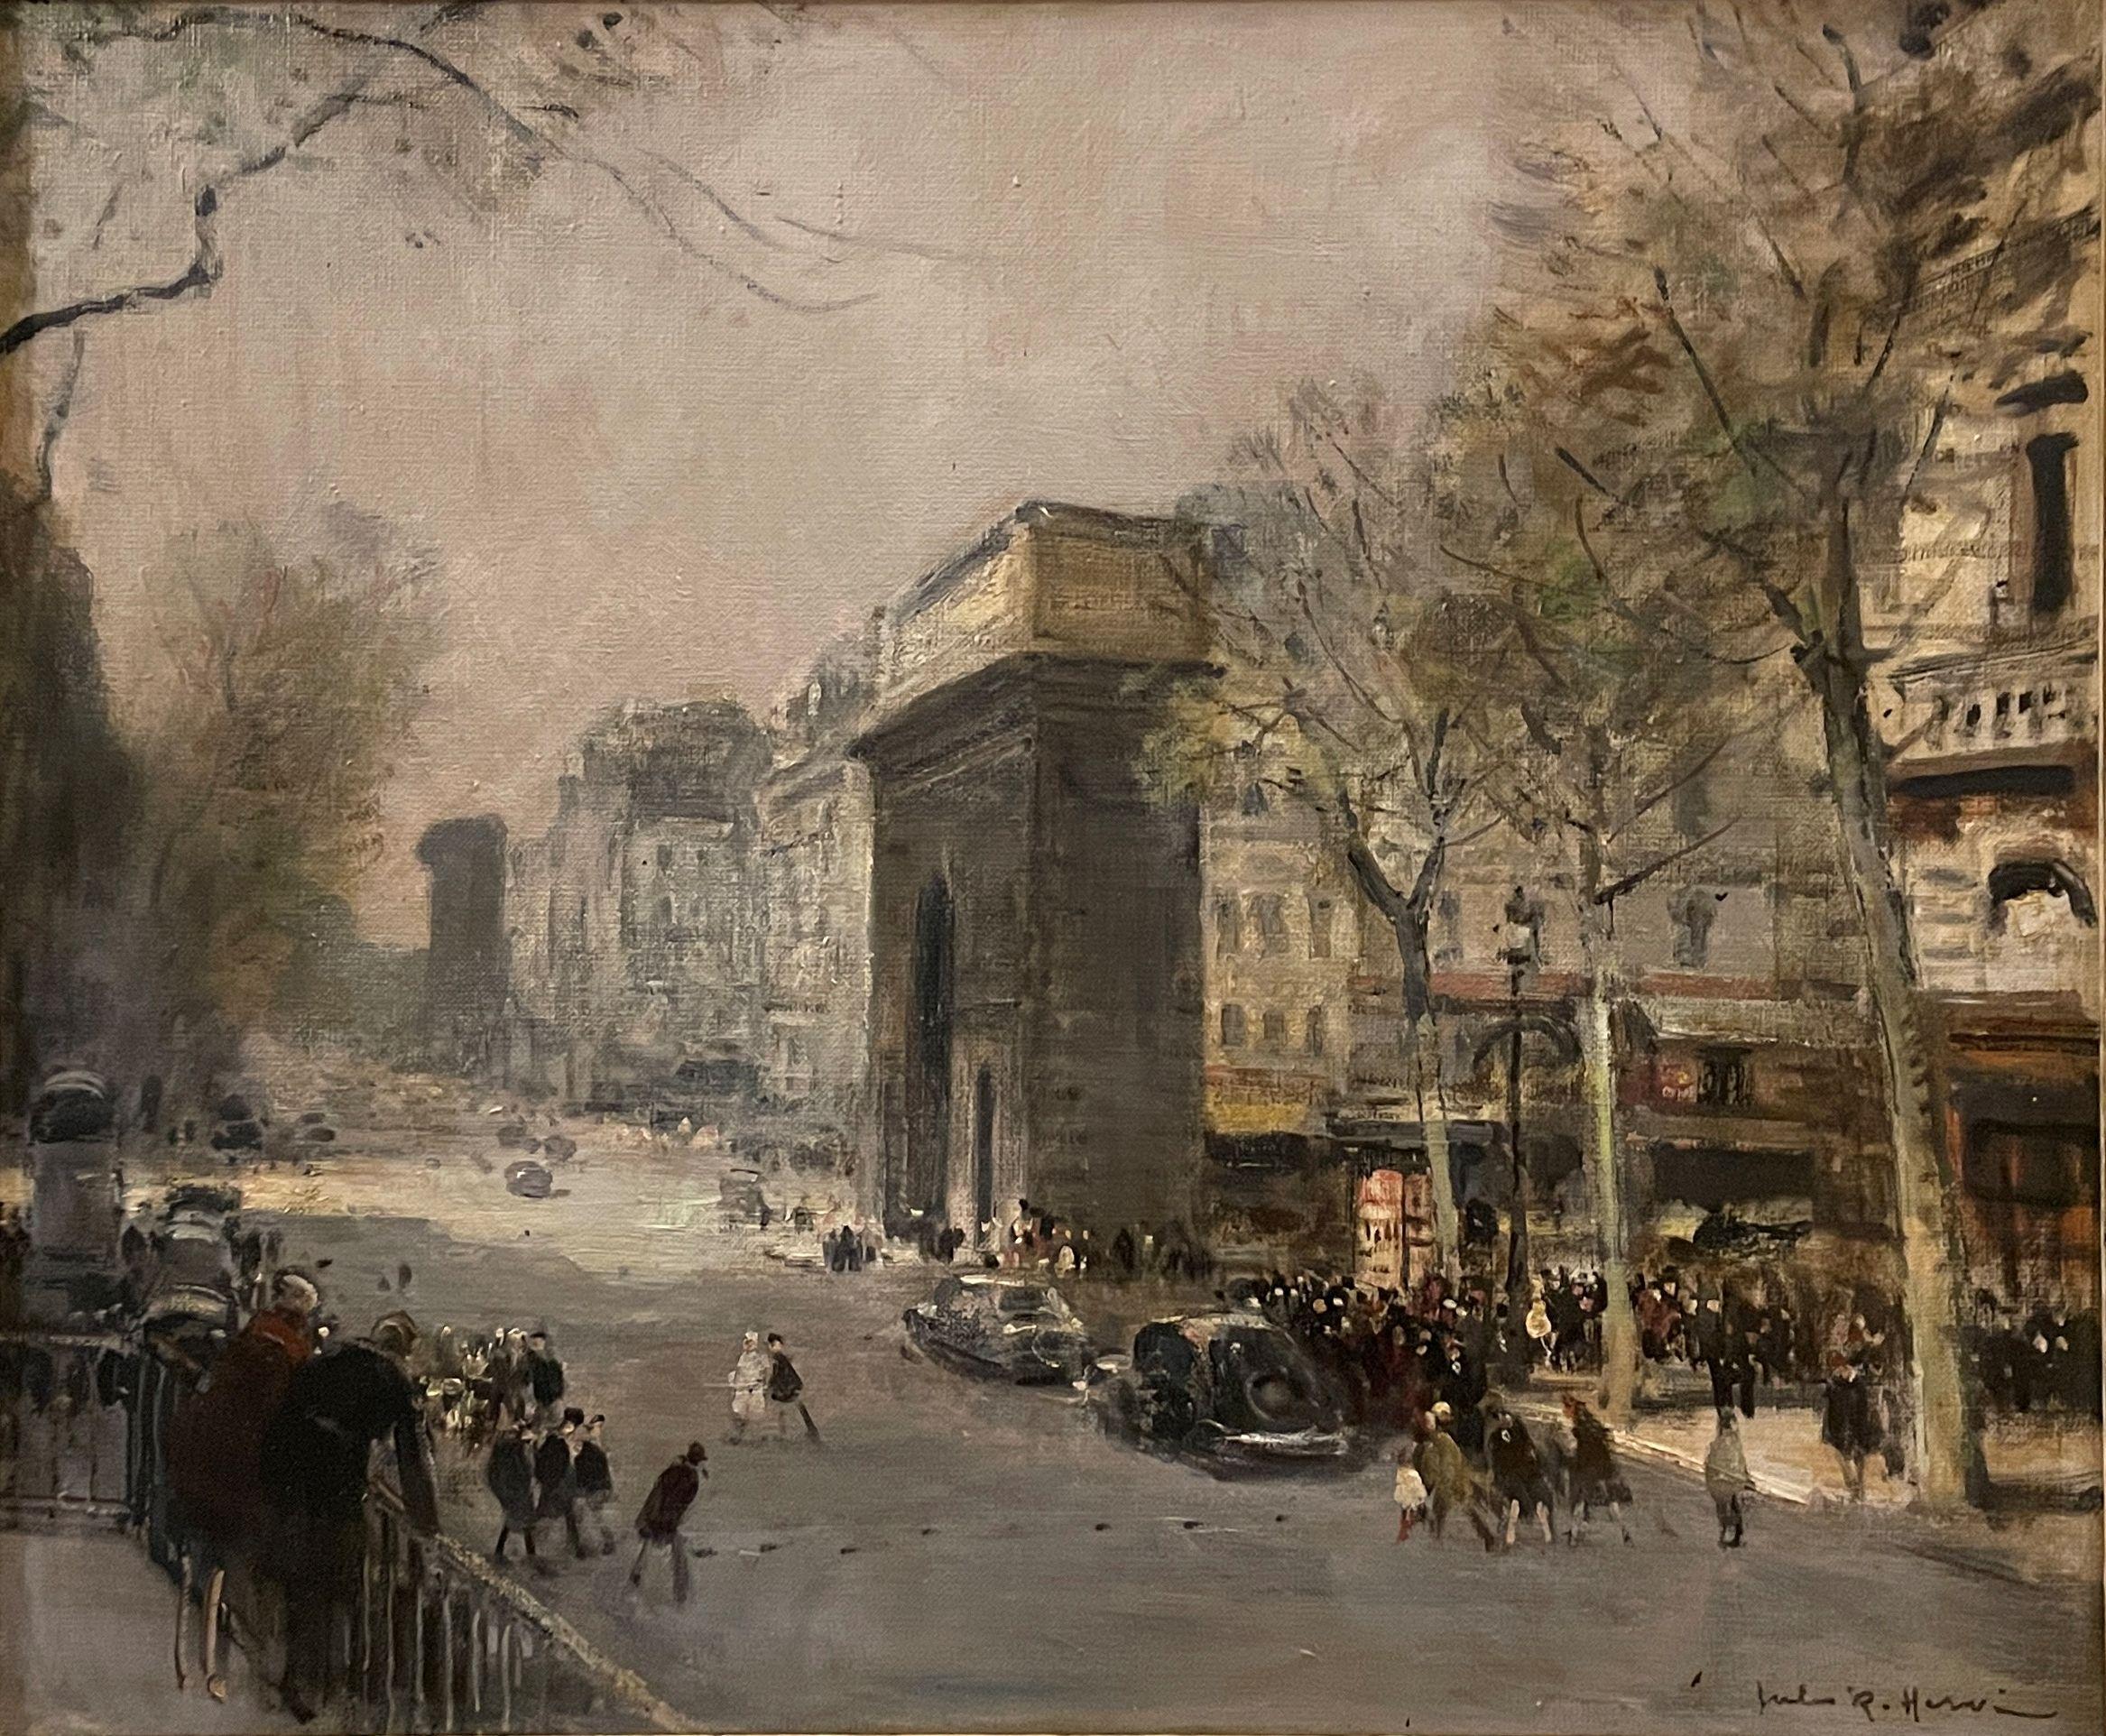 Jules Rene Herve (1887 - 1981)
Porte Saint-Martin, Paris, France
Oil on canvas
18 x 21 1/2 inches
Signed lower right and on the reverse

Provenance:
Harrod's, London, 1959
Mr. and Mrs. J.T. Whallon (acquired from the above)
Jack Barclay, St. Joseph,